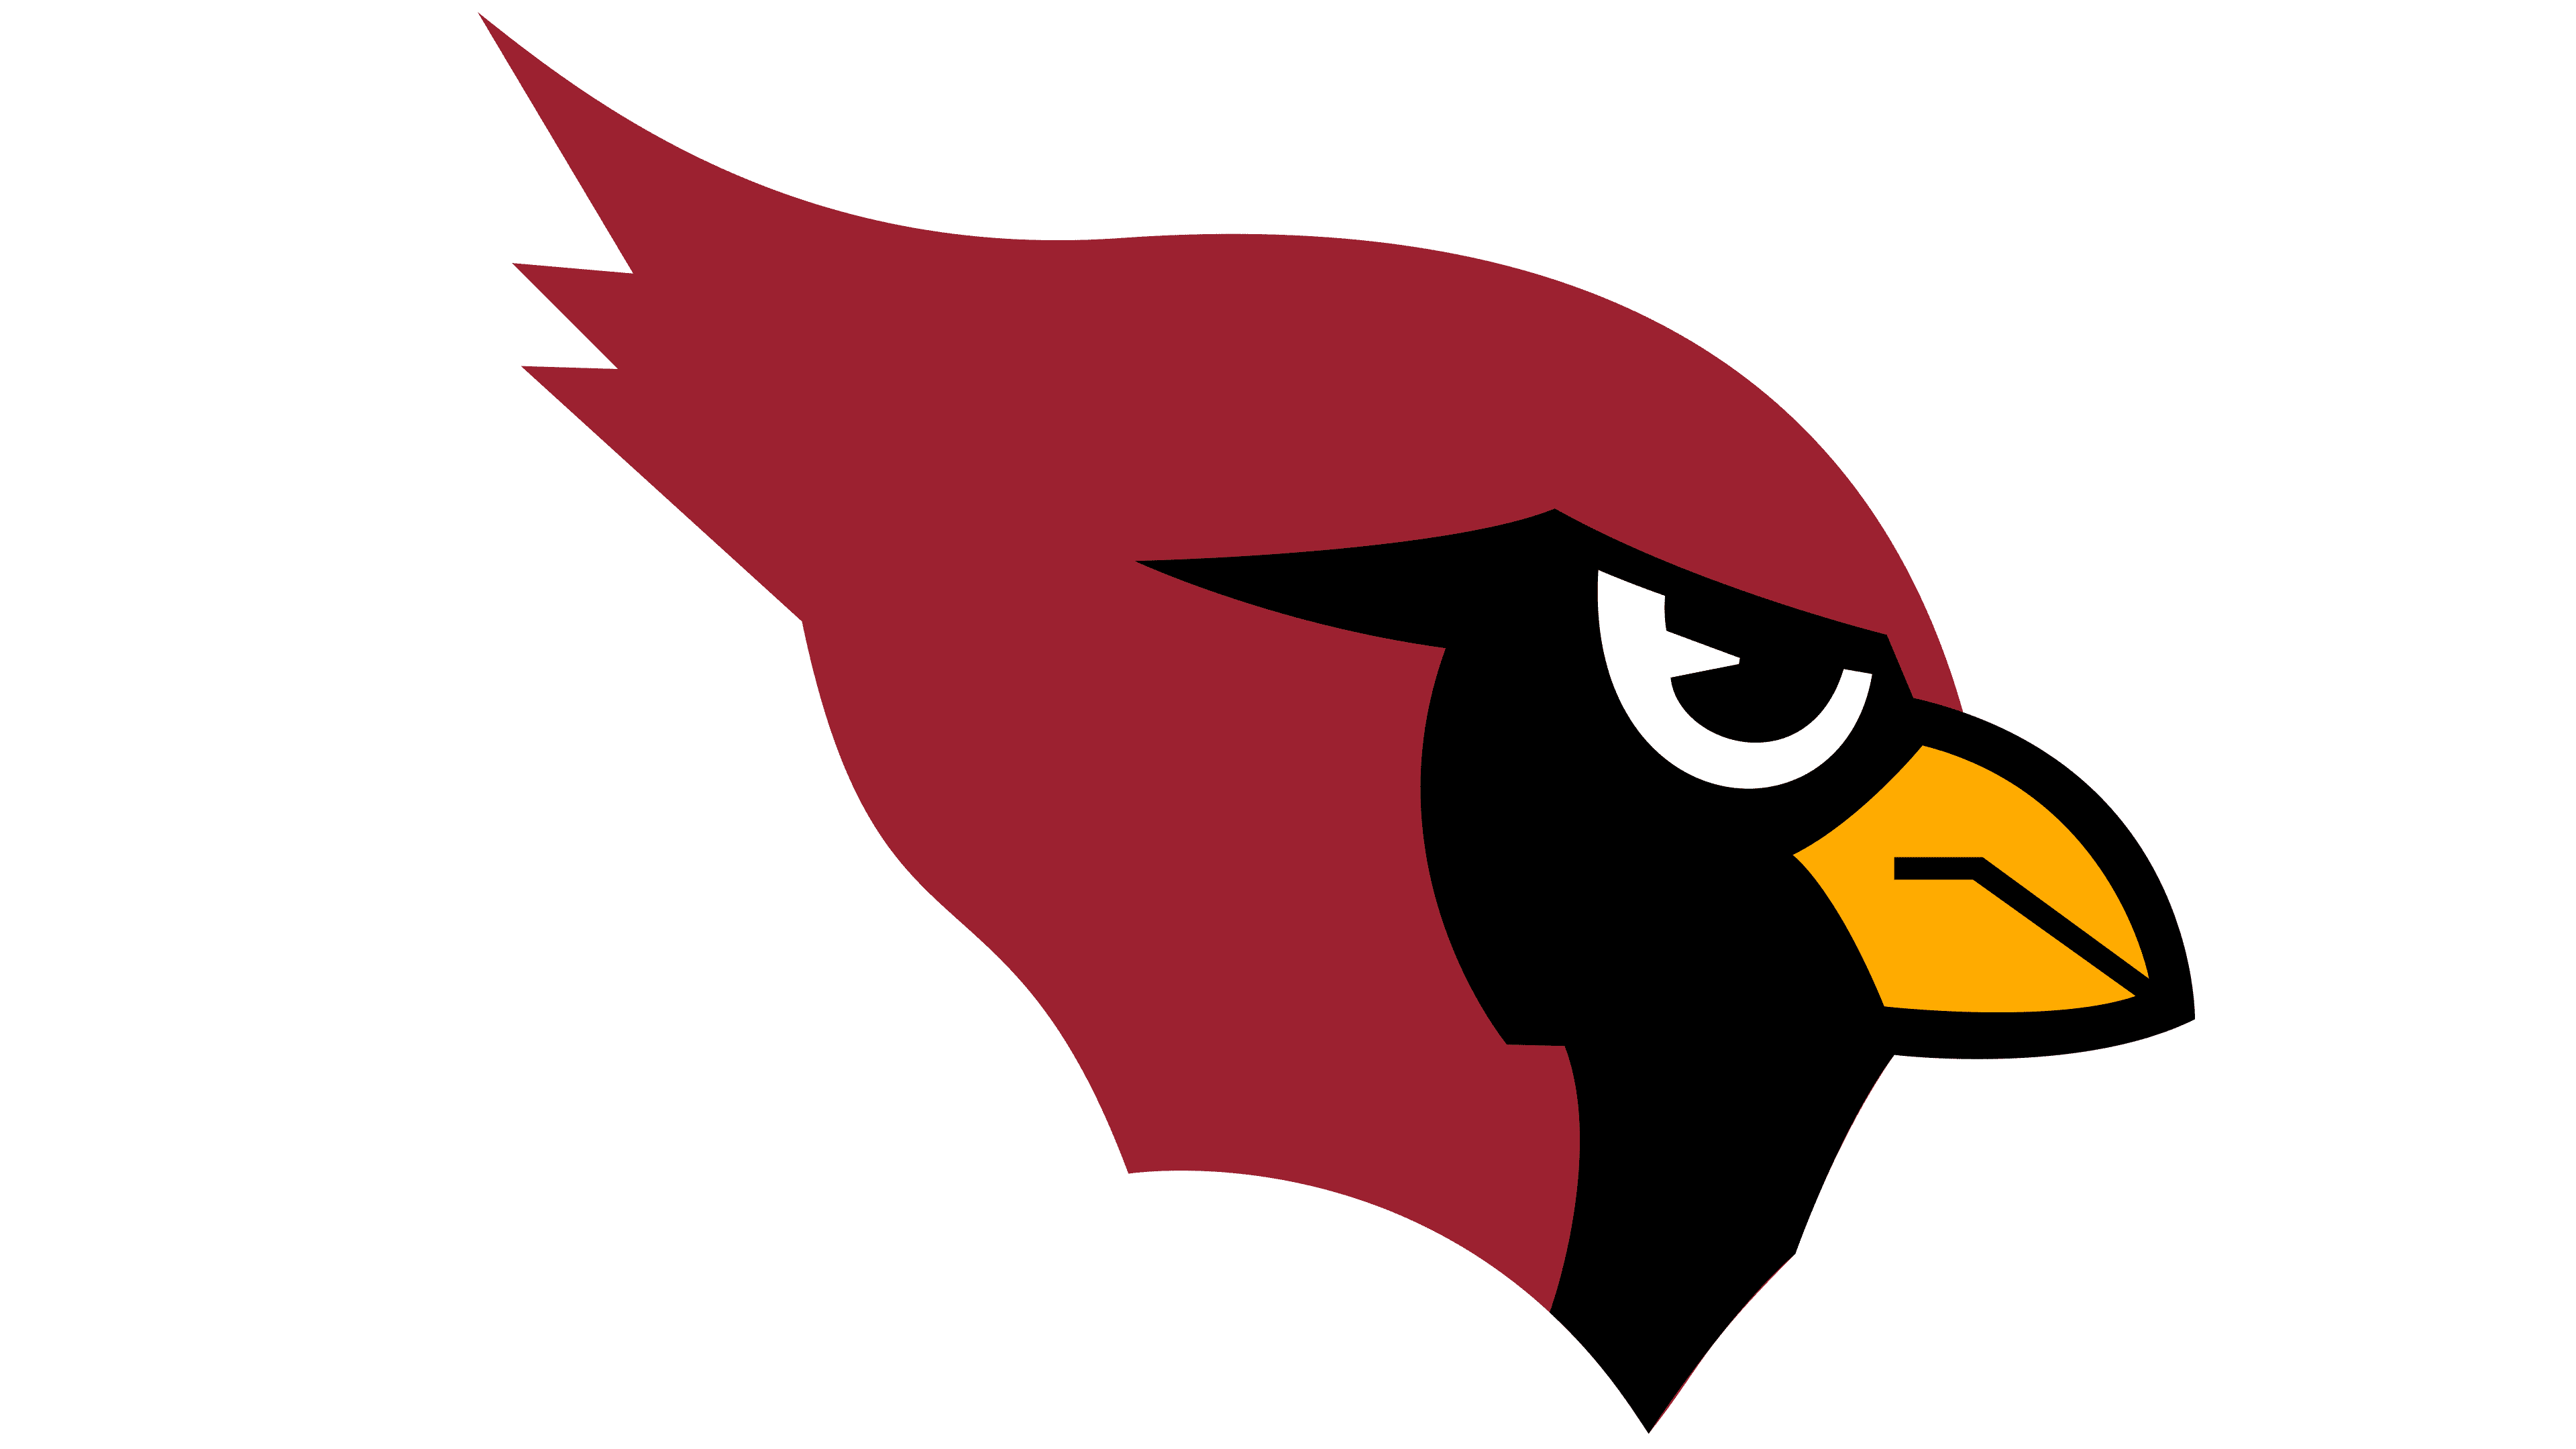 Arizona Cardinals Logo History | The most famous brands and company logos in the world